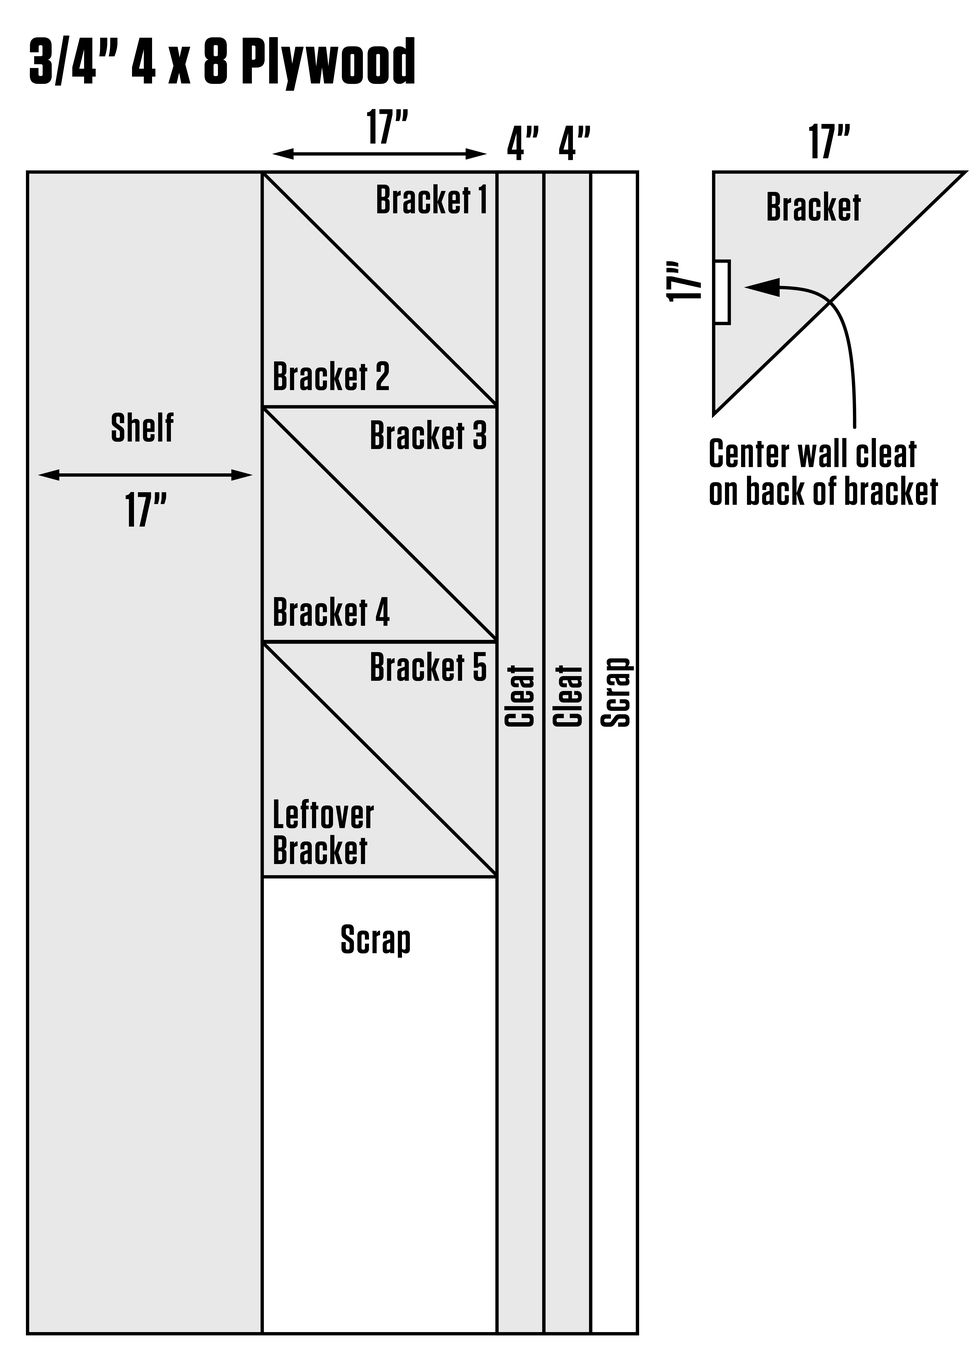 cutting diagram illustrating how to lay out the shelf parts on a sheet of plywood